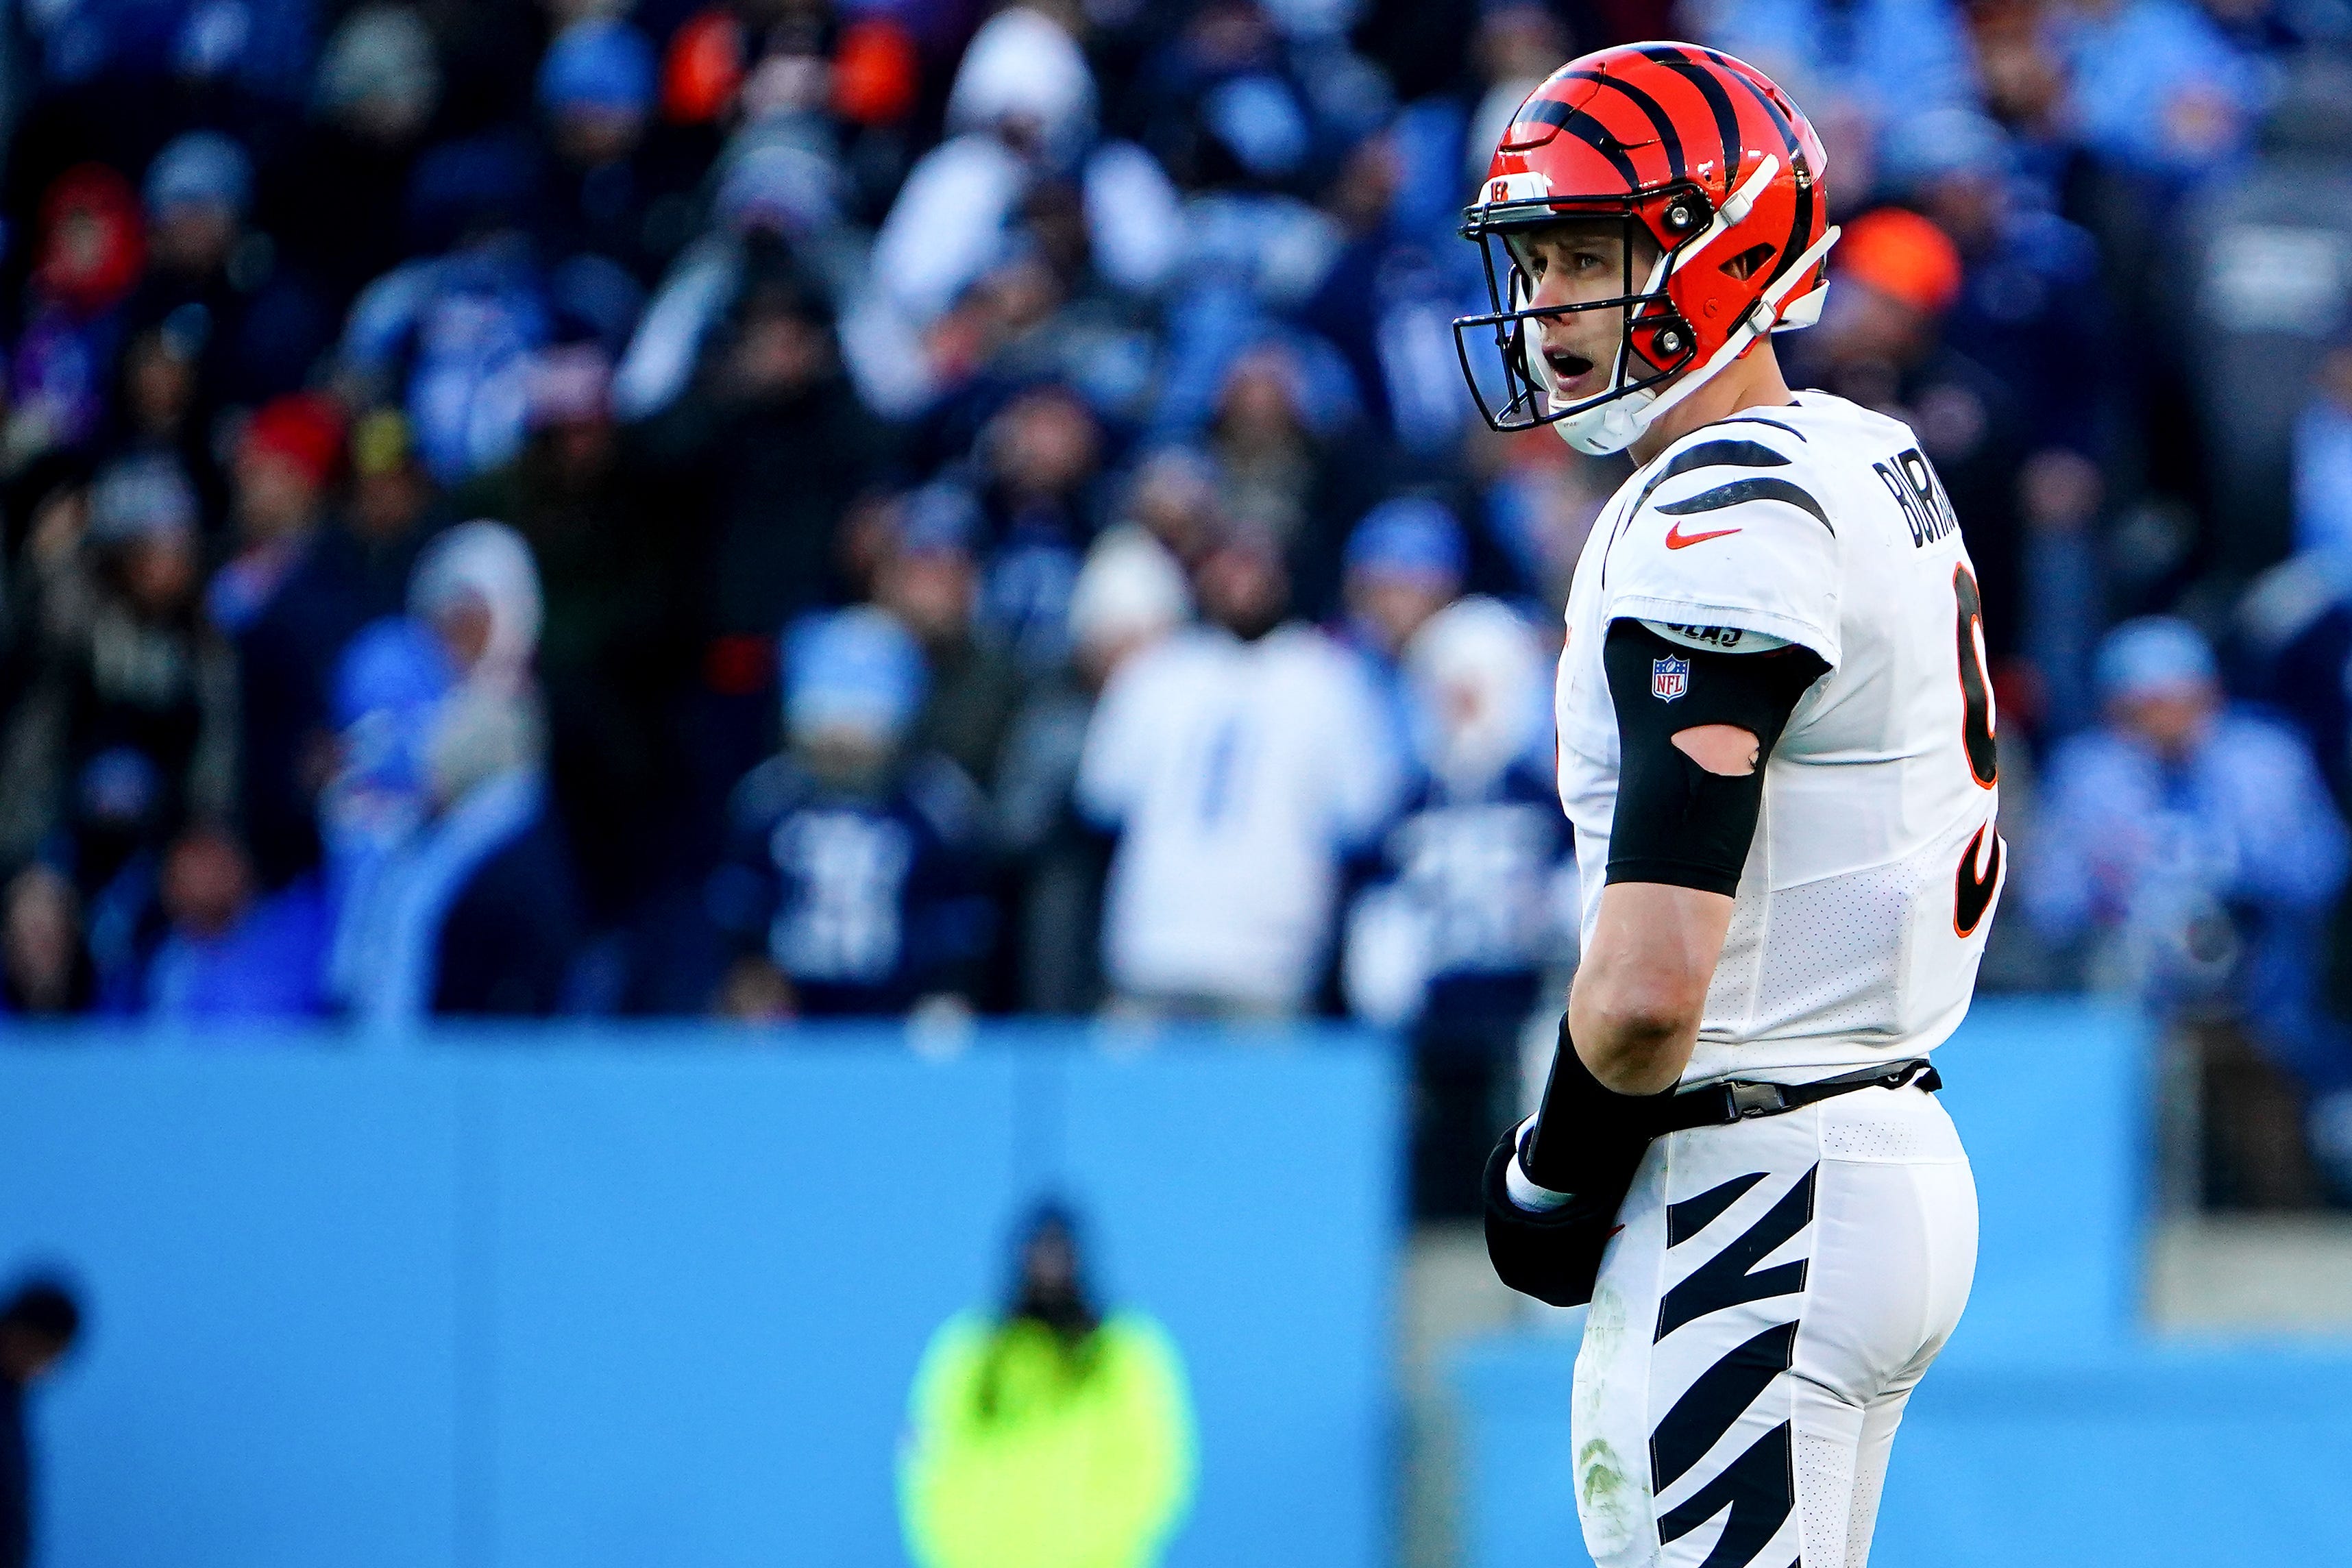 Cincinnati Bengals quarterback Joe Burrow (9) looks at the scoreboard in the first quarter during an NFL divisional playoff football game against the Tennessee Titans, Saturday, Jan. 22, 2022, at Nissan Stadium in Nashville. Cincinnati Bengals At Tennessee Titans Jan 22 Afc Divisional Playoffs